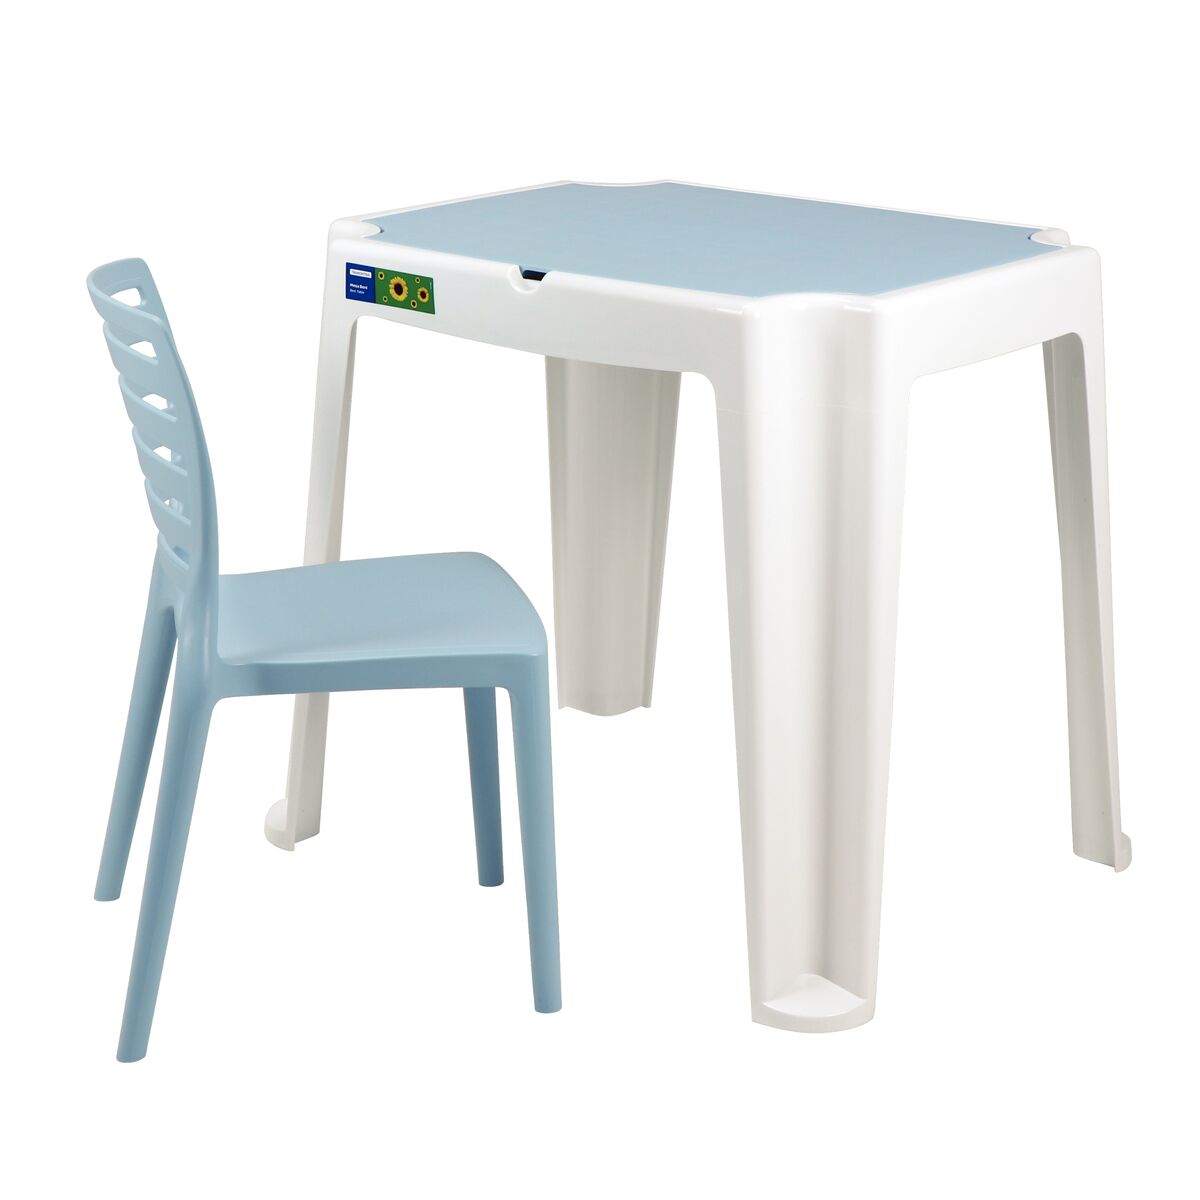 Tramontina Beni Children Table and Chair Set in Blue Polypropylene with Activity Board